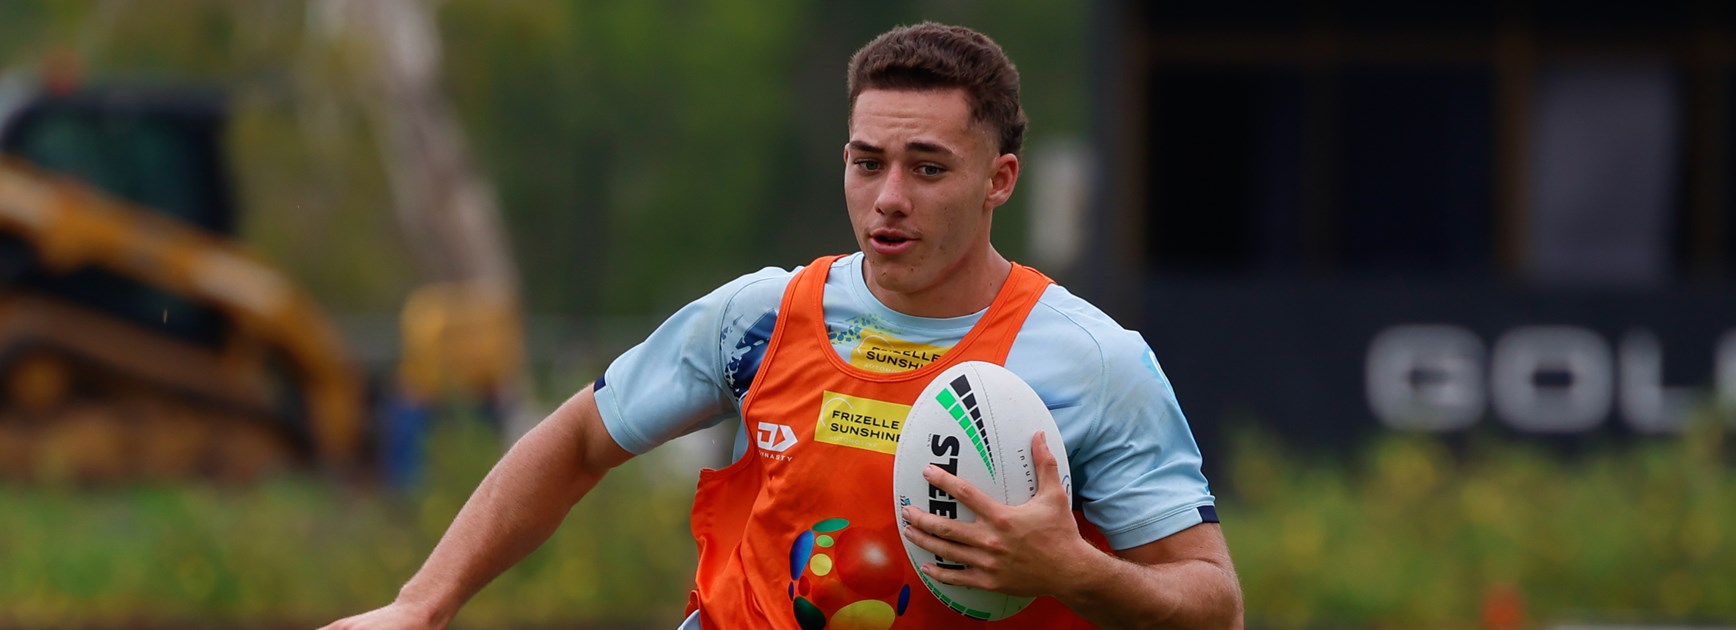 School's out... but not for these two Future Titans doing a NRL pre-season